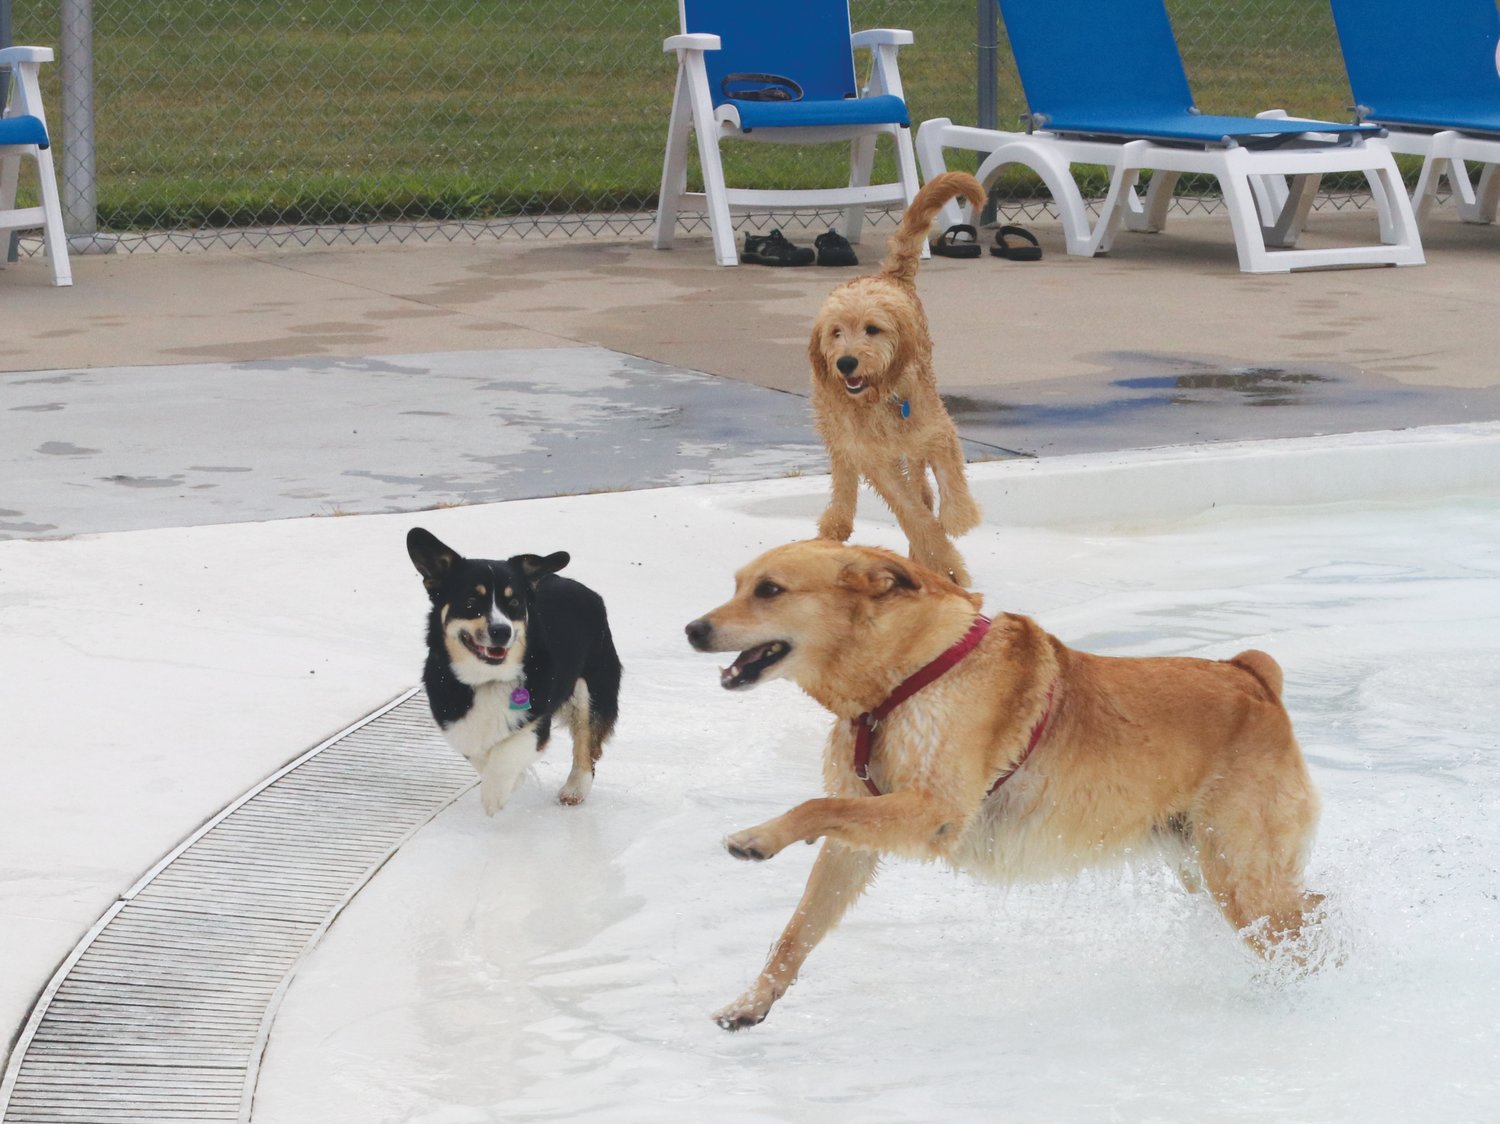 Roxy the Corgi, Murphy the Goldendoodle and Bella the Golden Retriever and Jack Russell Terrier splash in the Kalona pool on Saturday, Aug. 21.